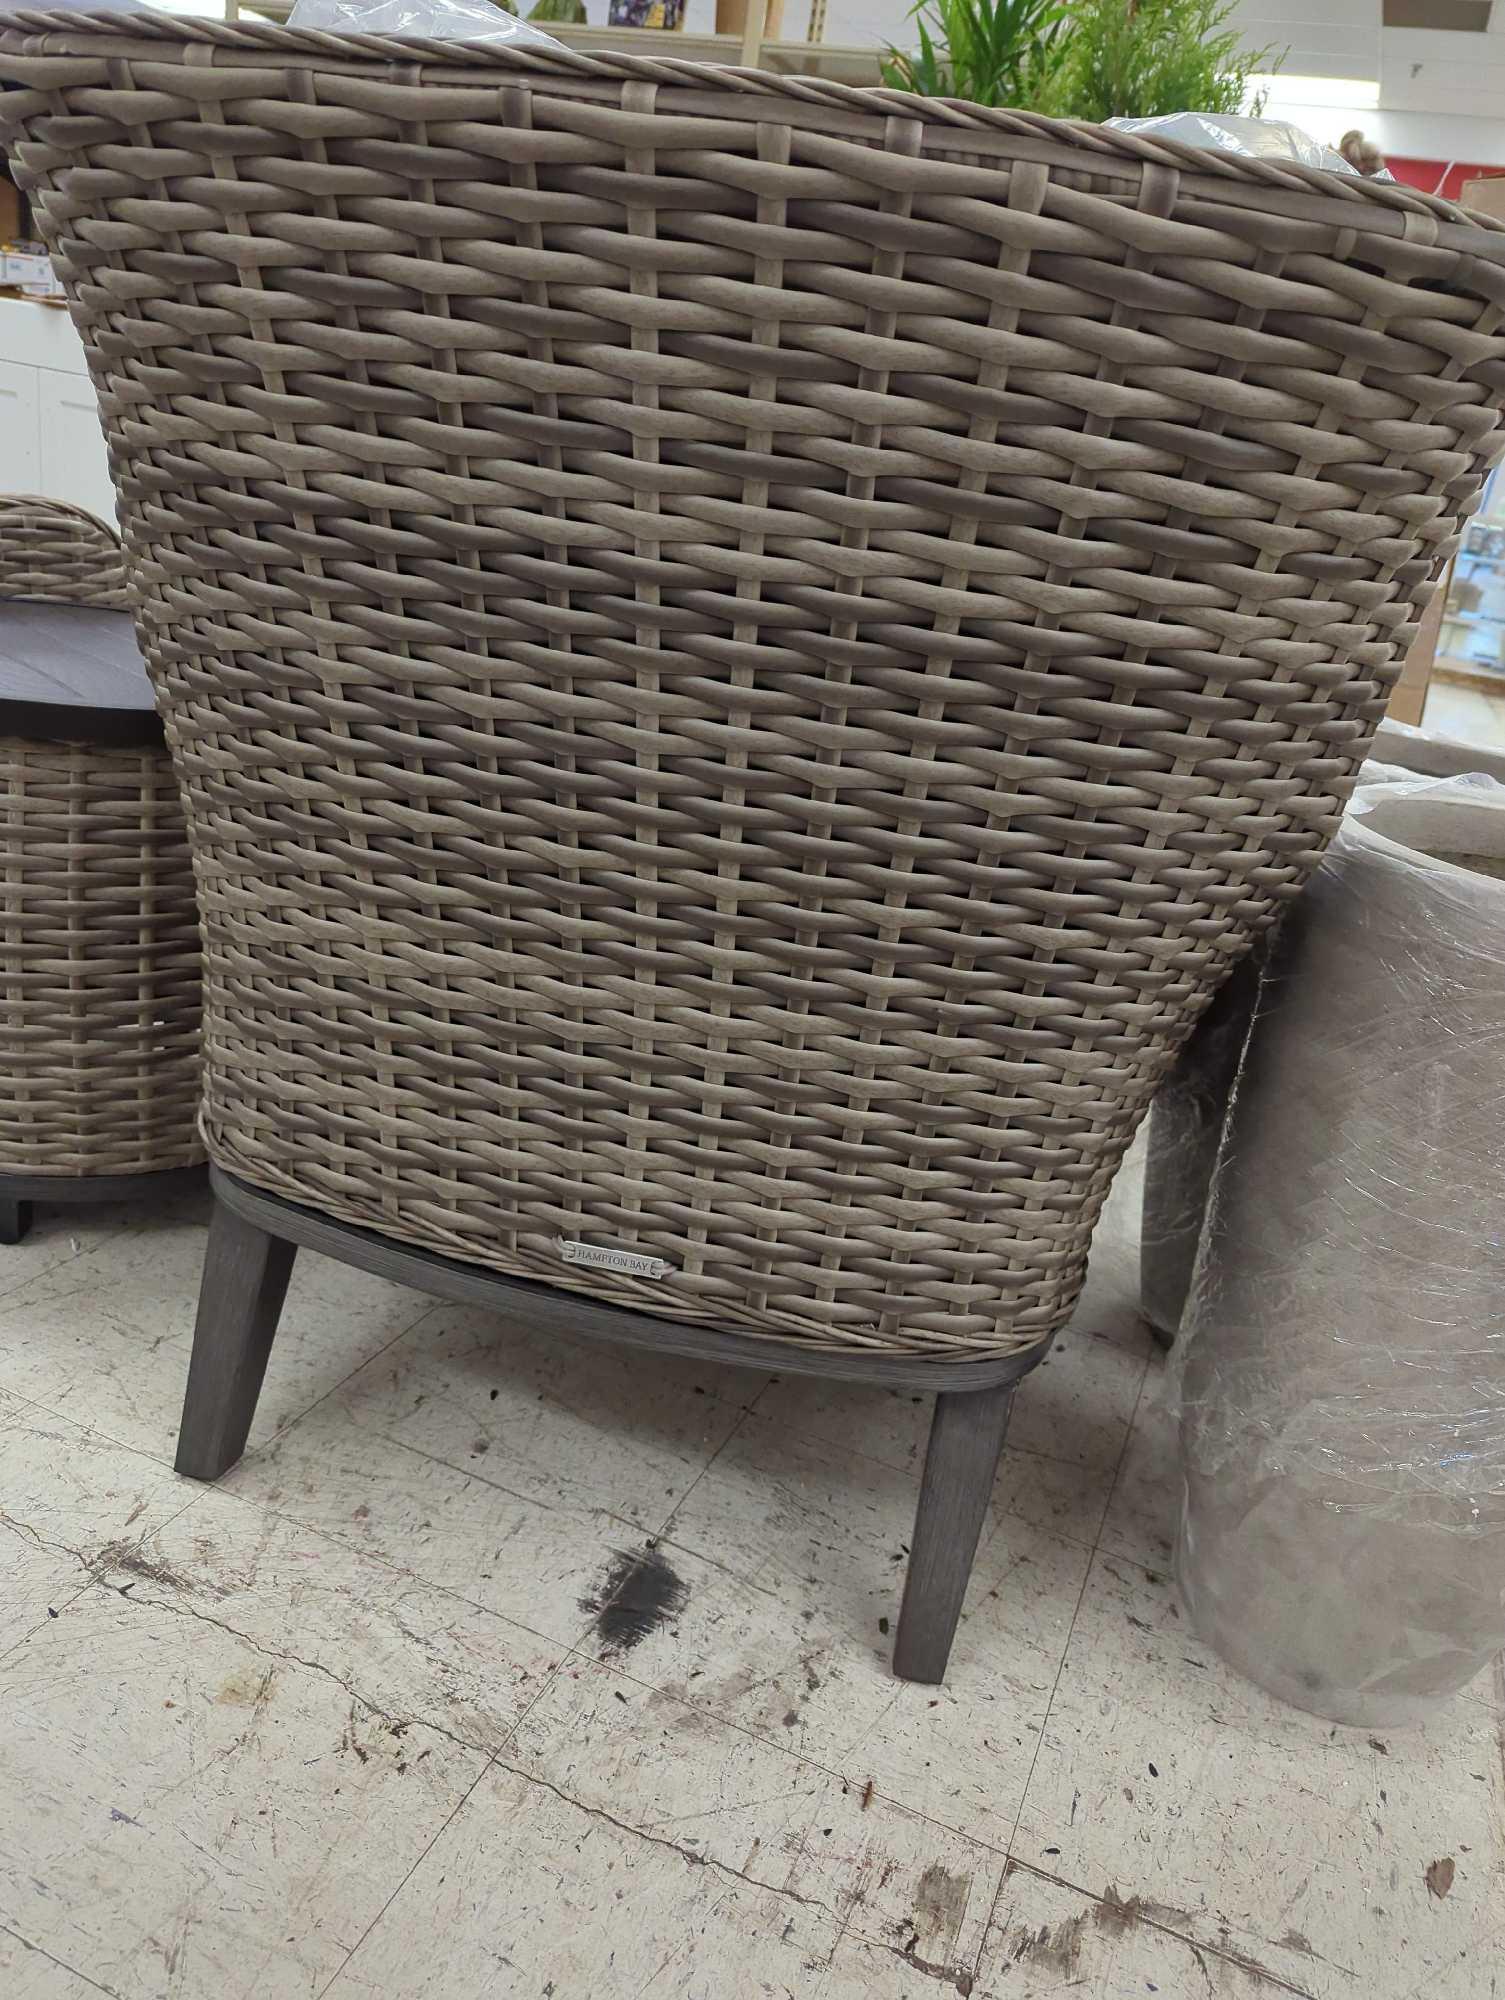 (Missing One Back Cushion) Hampton Bay Cooper Lake 3-Piece Wicker Patio Conversation Set with